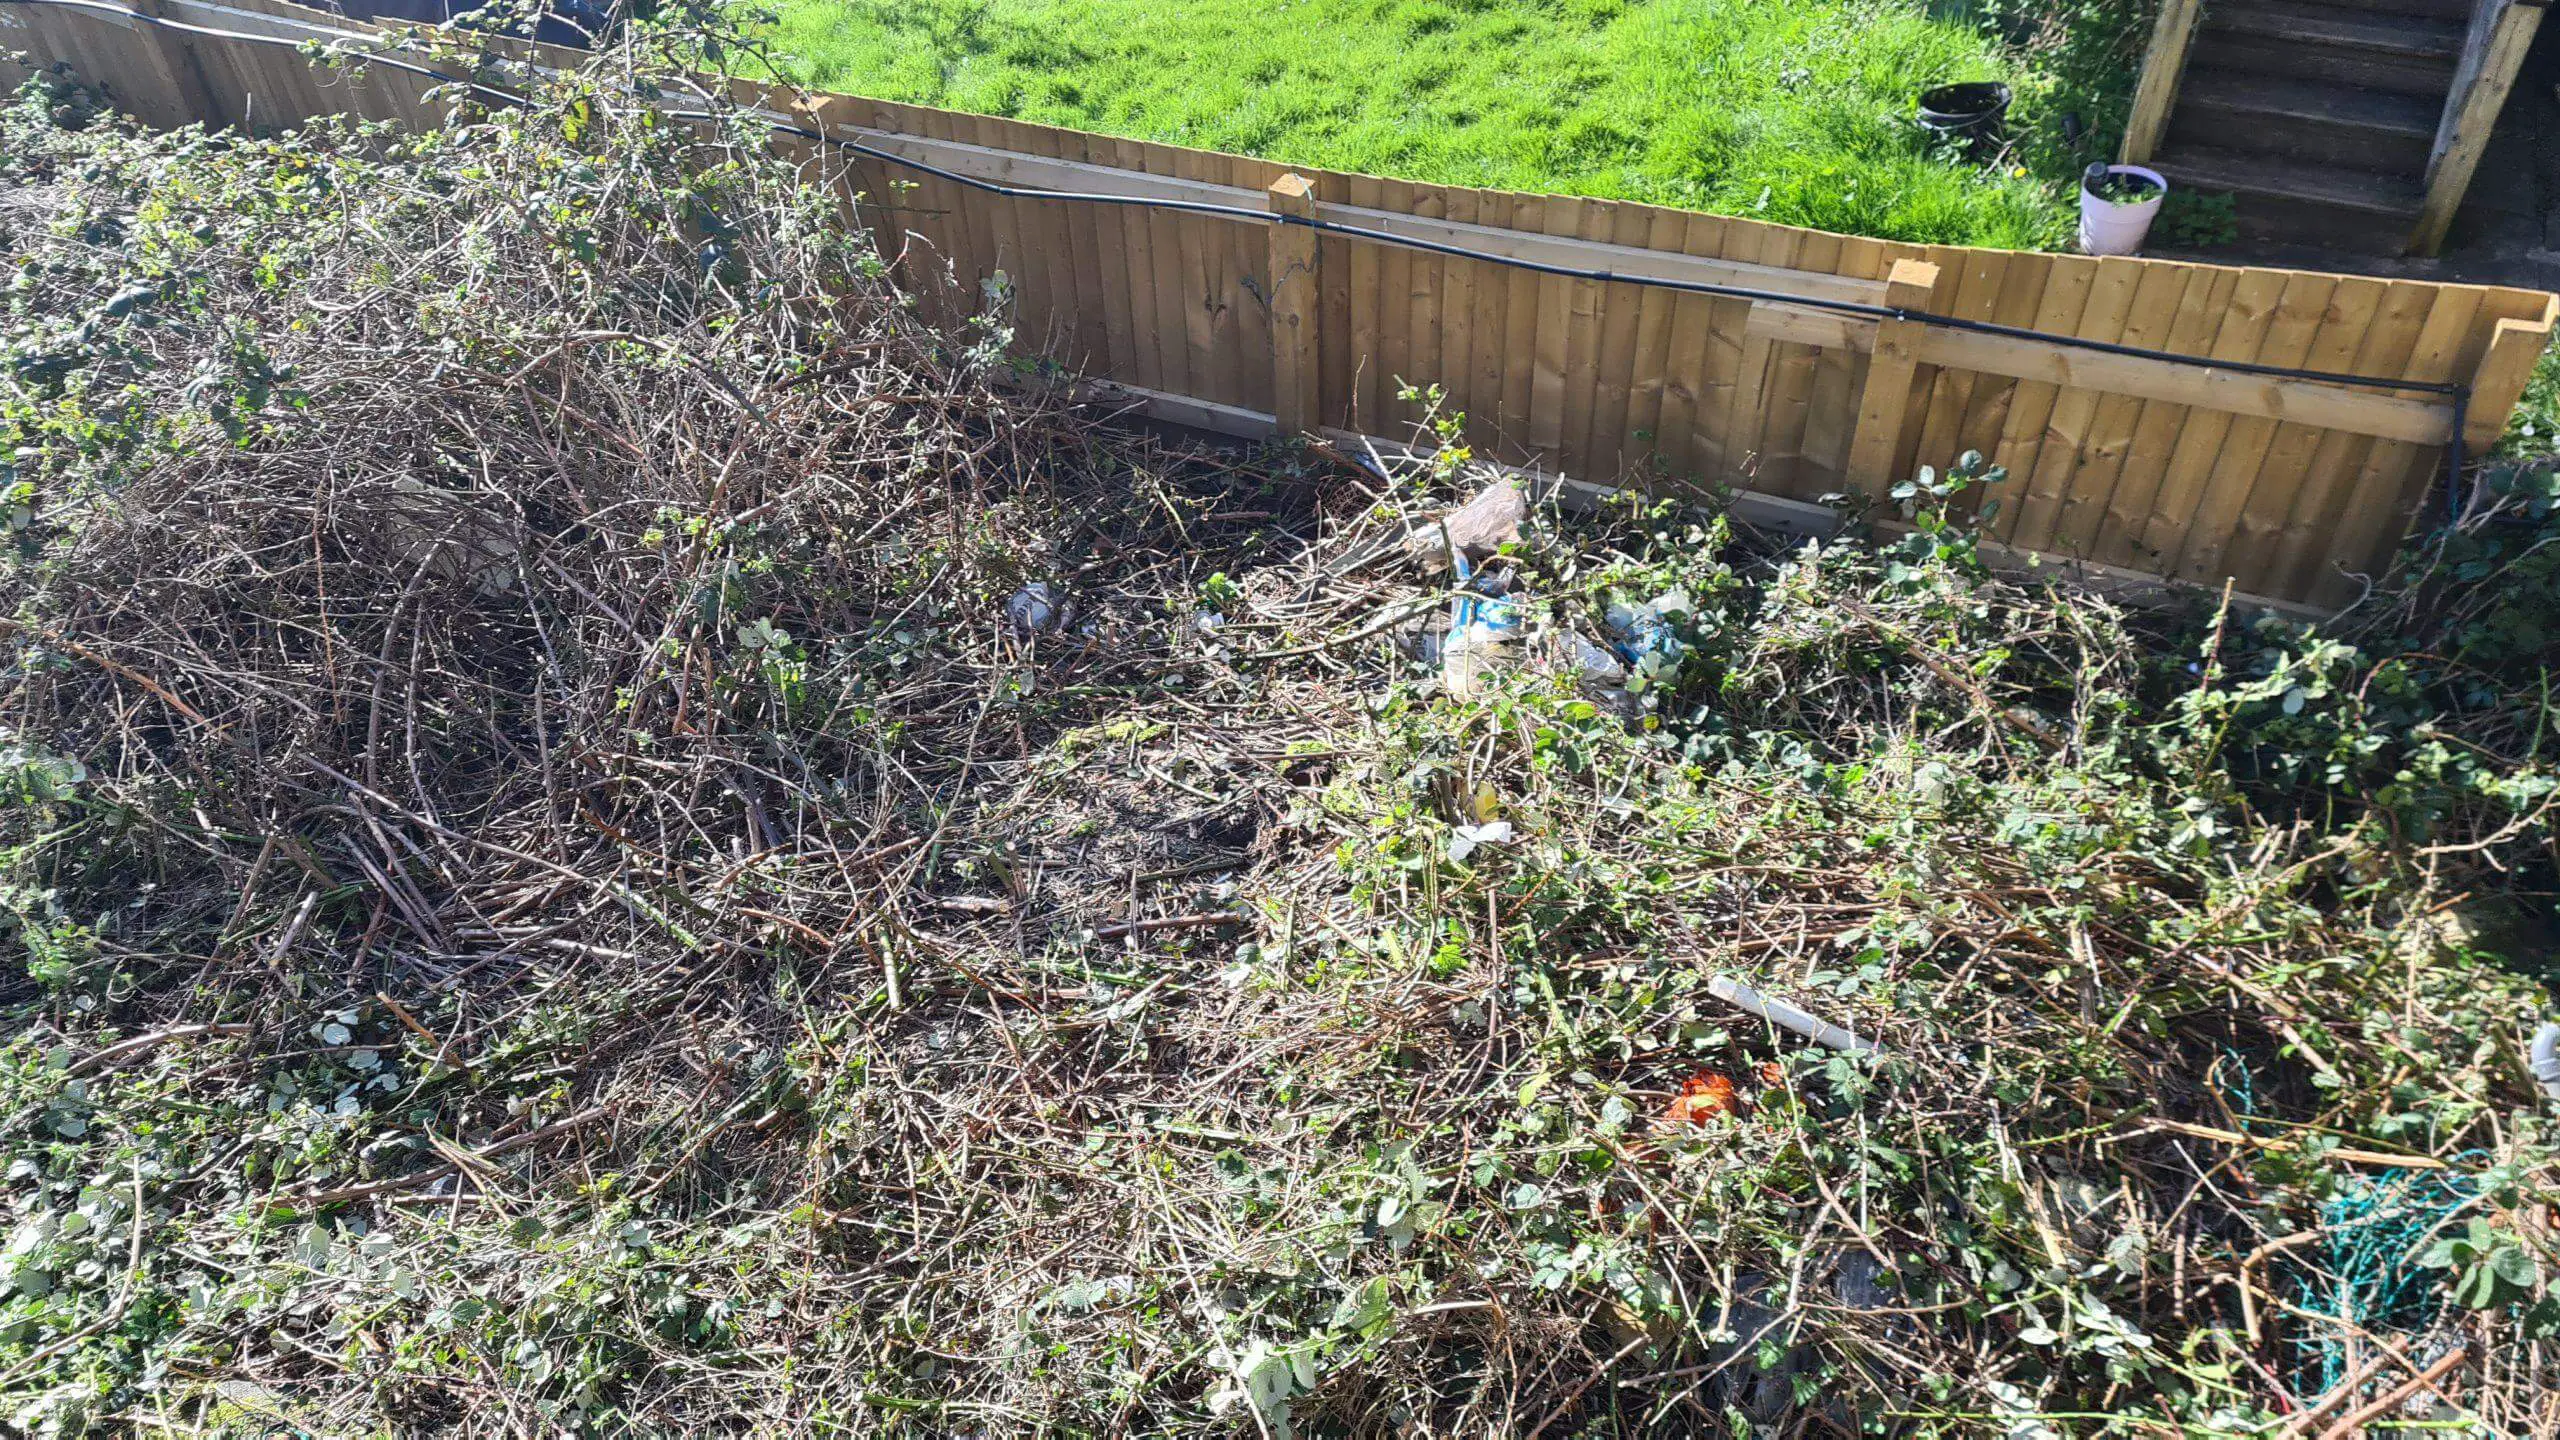 In the middle of clearing brambles from a garden to regain the space